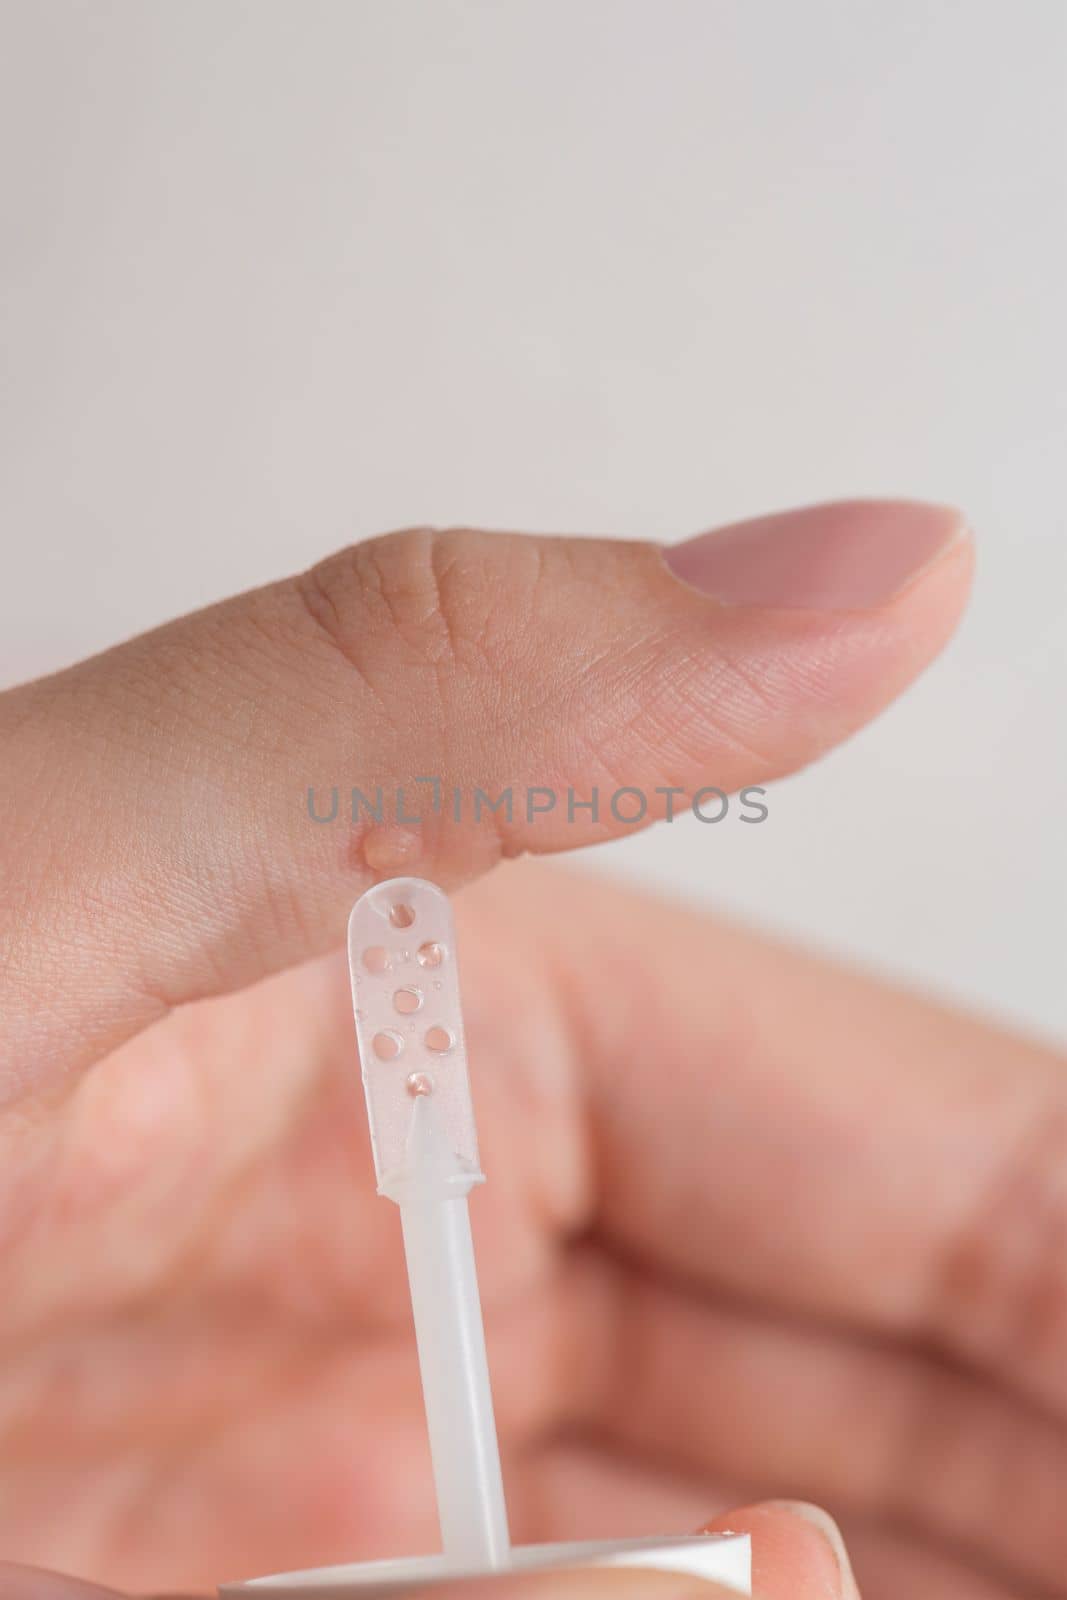 Wart treatment process. The doctor applies the medicine with a special spatula to the wart. Getting rid of a benign formation on human skin by using a medicine